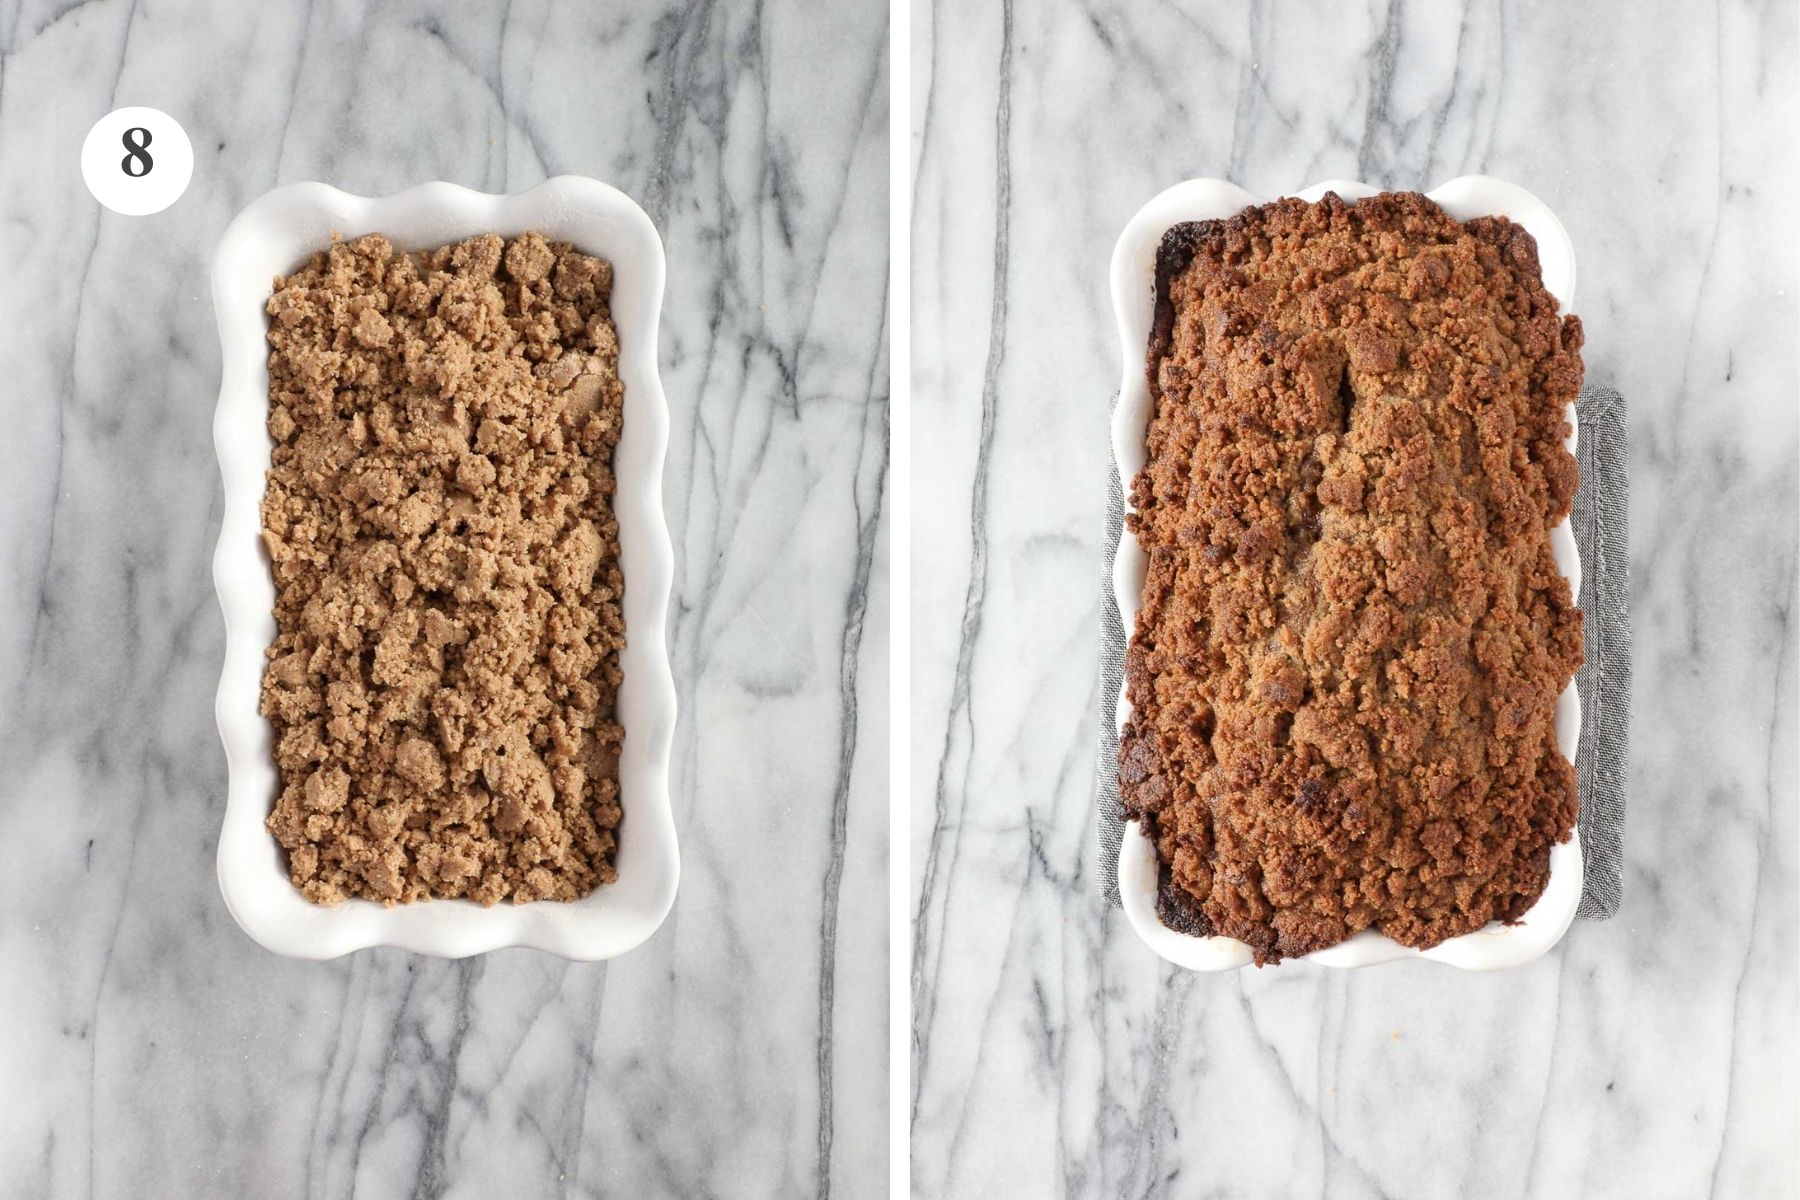 Not yet baked loaf of banana bread with streusel topping, next to the same banana bread straight out of the oven.